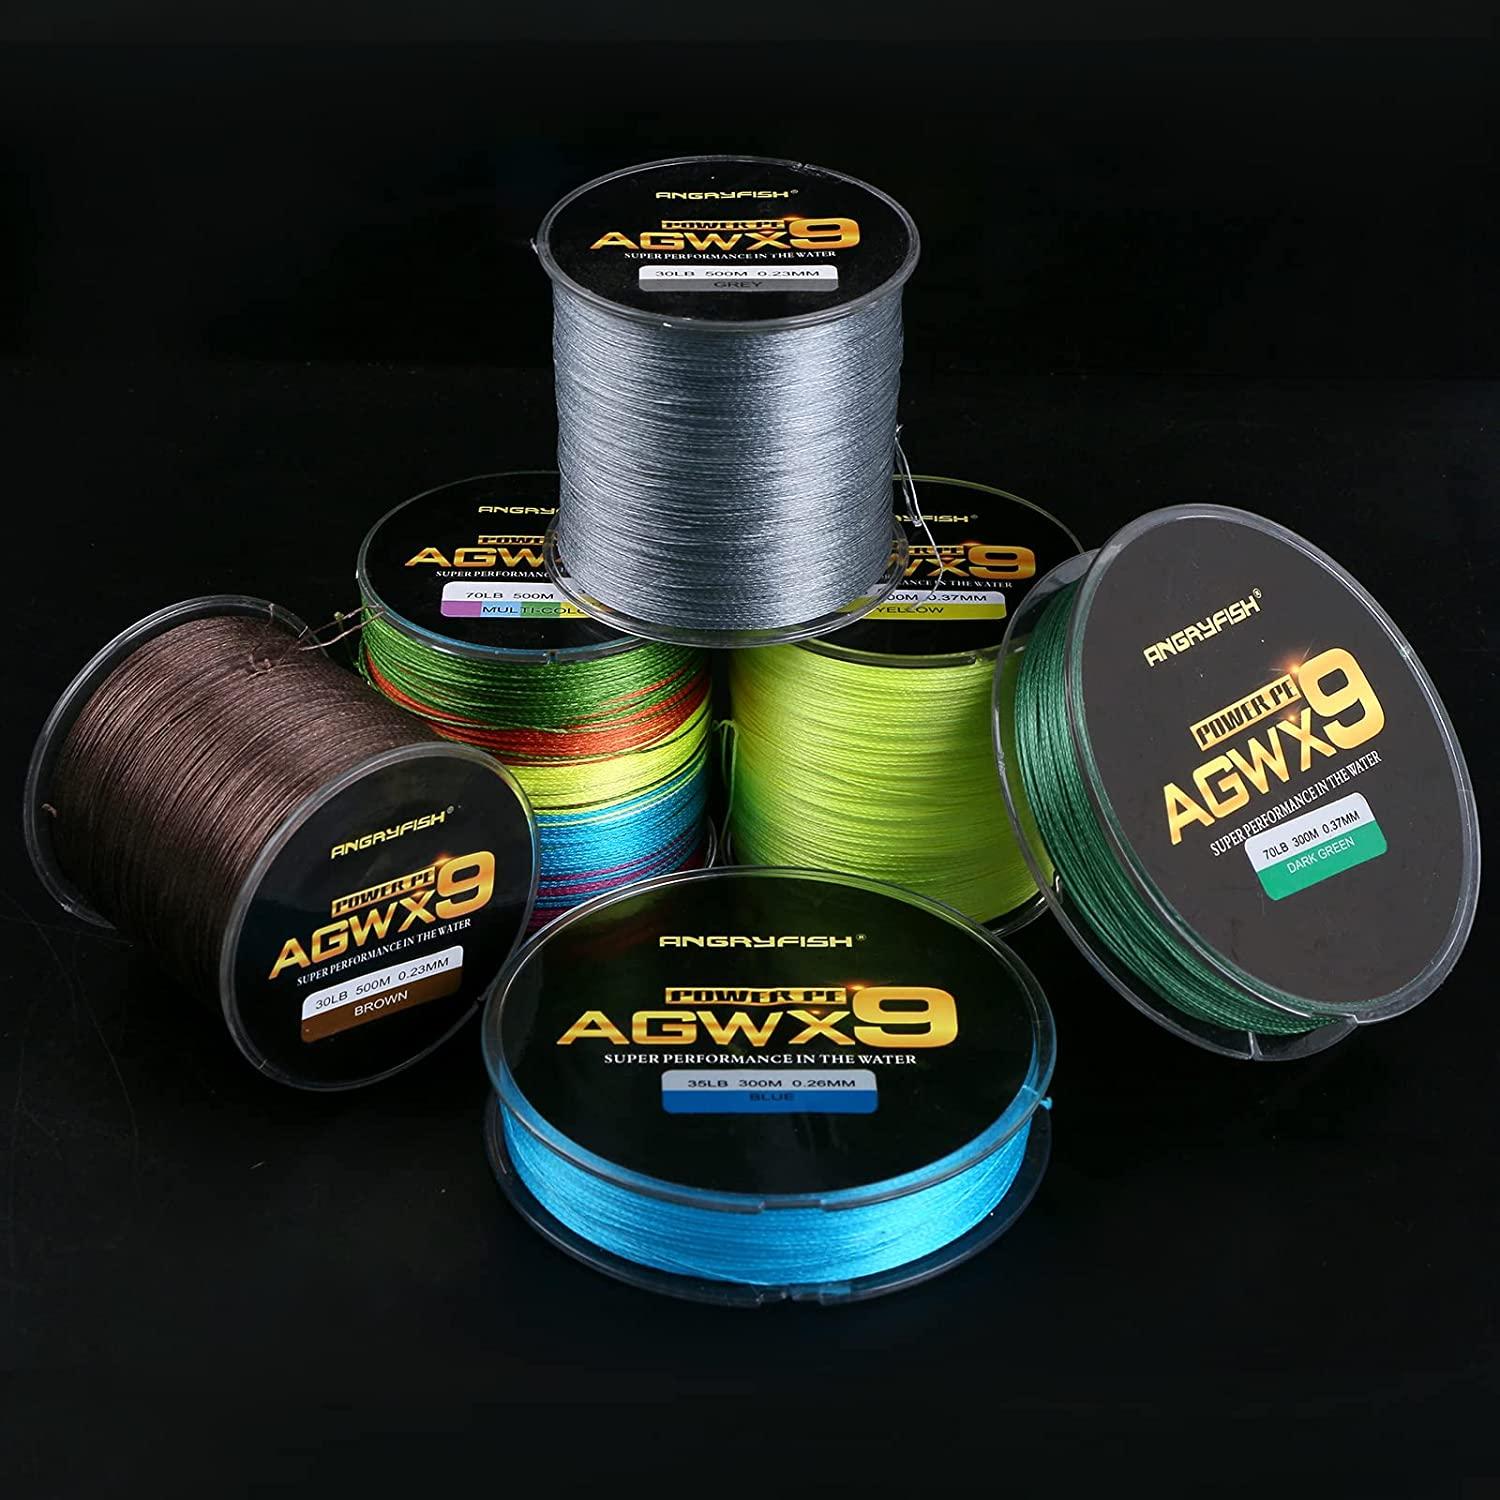 ANGRYFISH AGWX9 Braided Fishing Line,Cost-Effective Superline